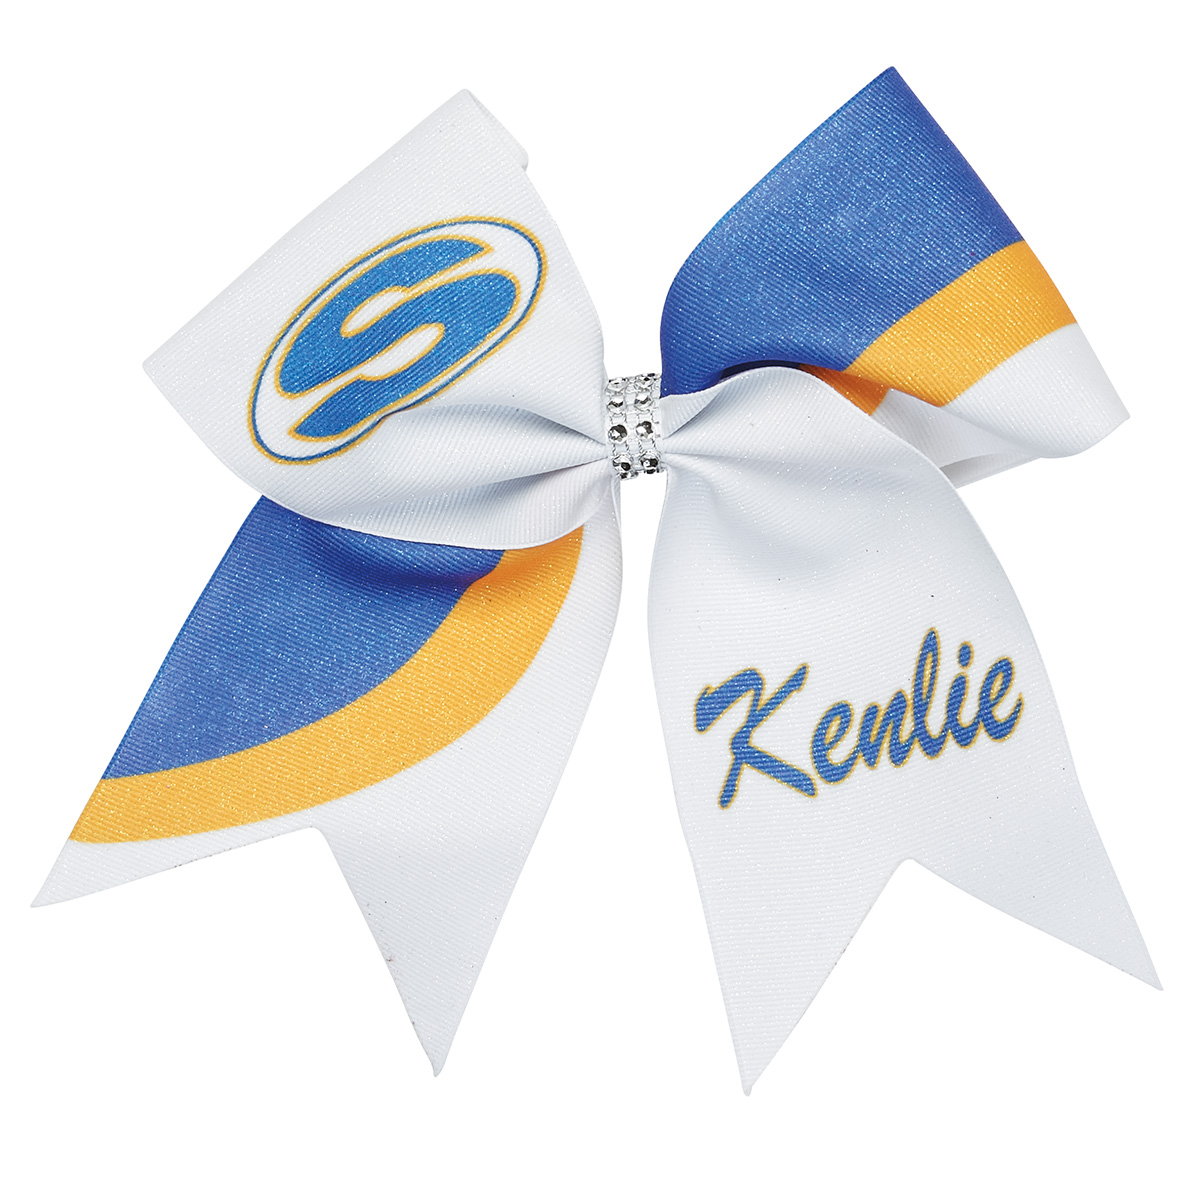 Personalized Embroidered White Long Tail Hair Bow for girls and cheer teams